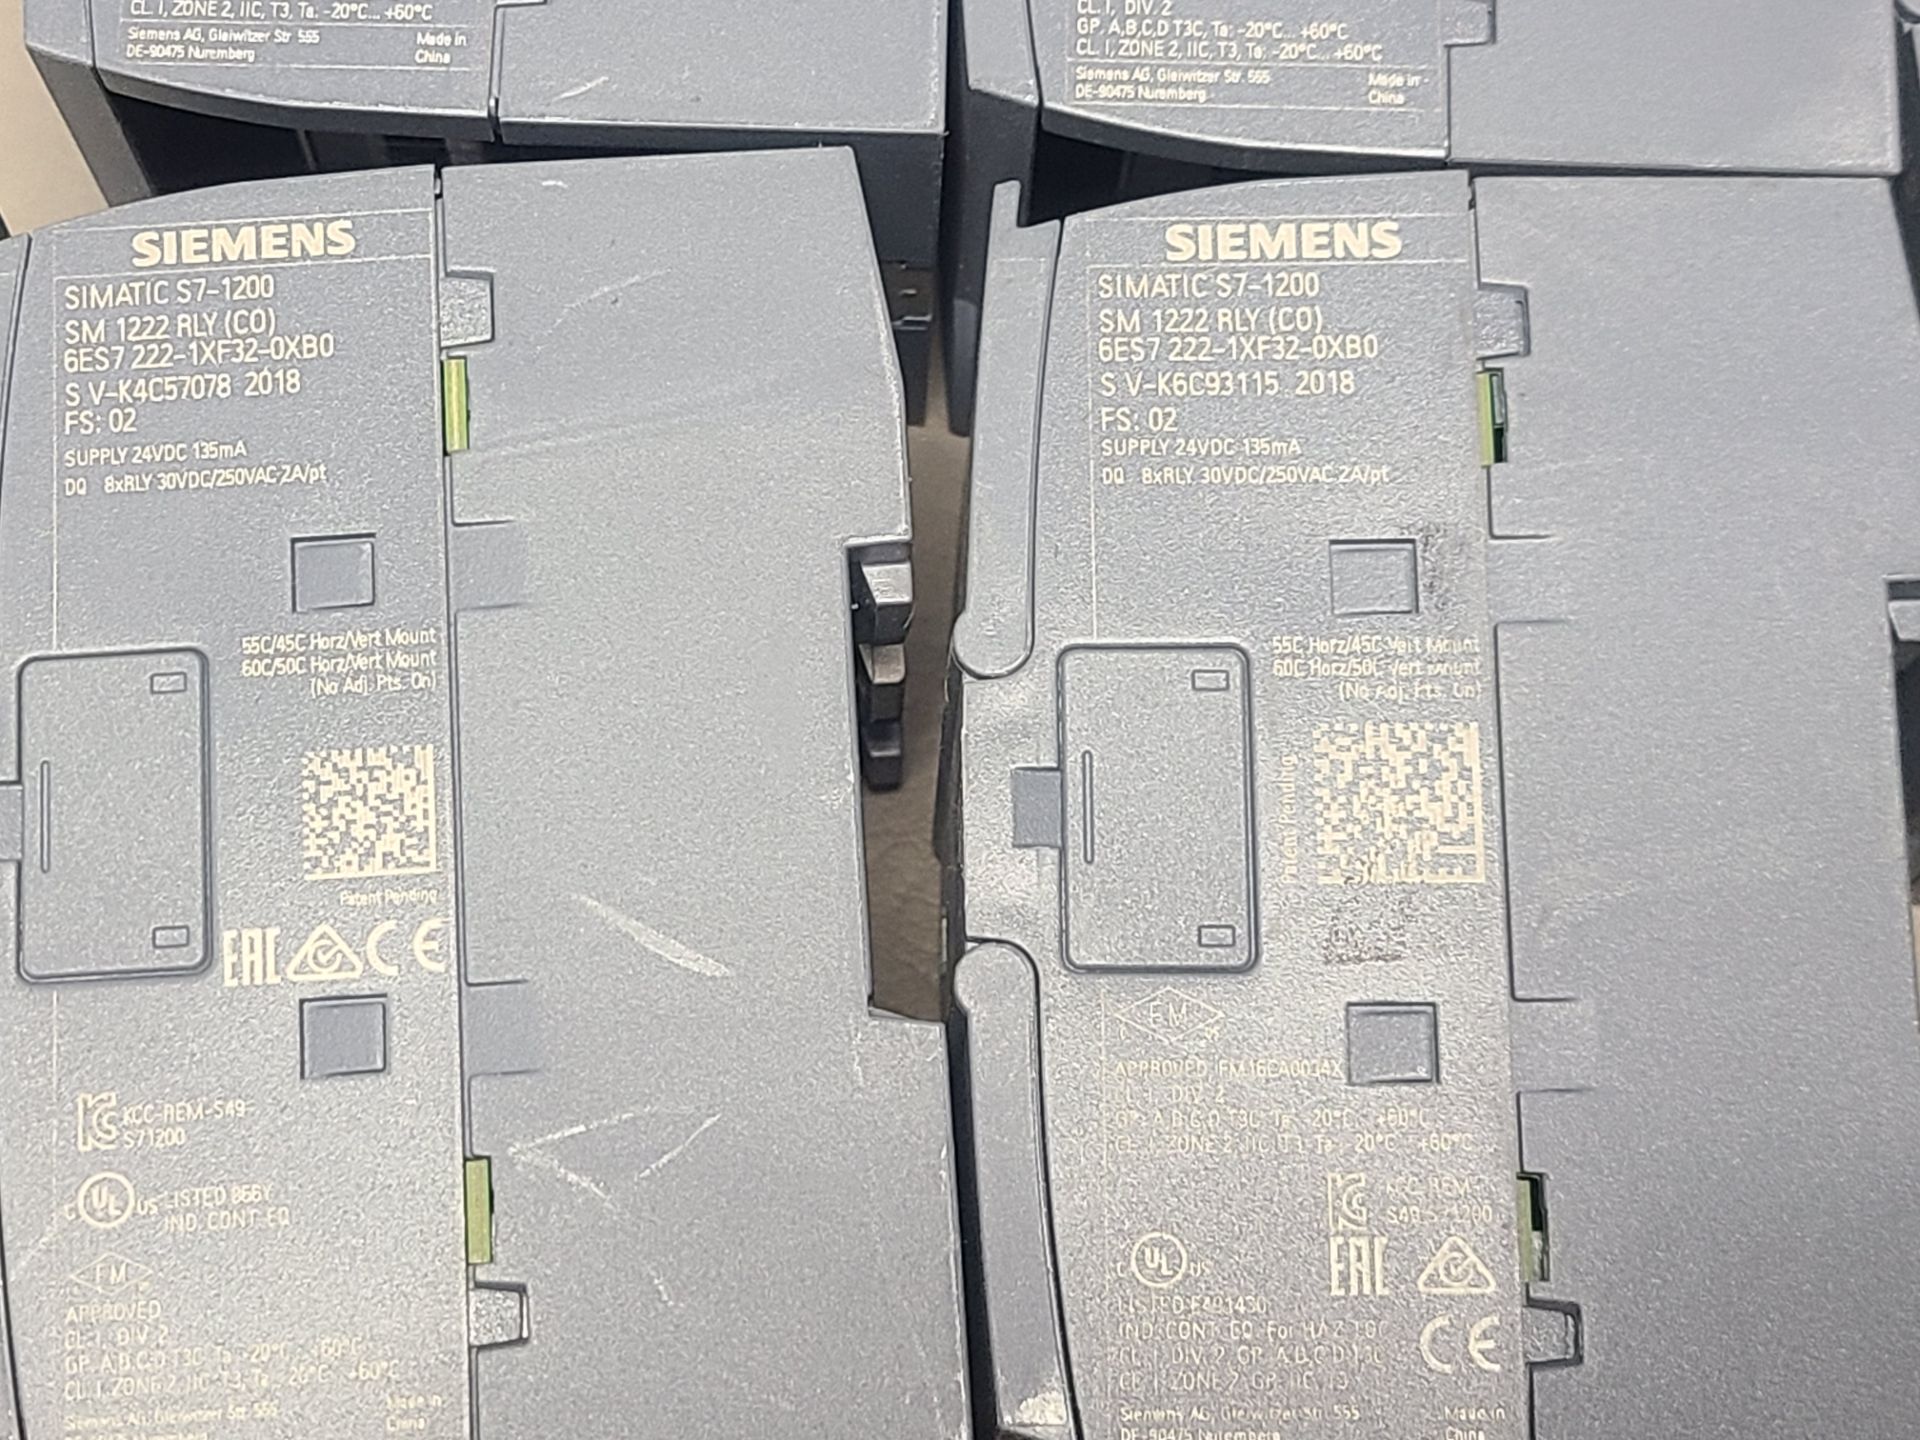 LOT OF SIEMENS S7-1200 DIGITAL OUTPUT PLC MODULES - Image 7 of 8